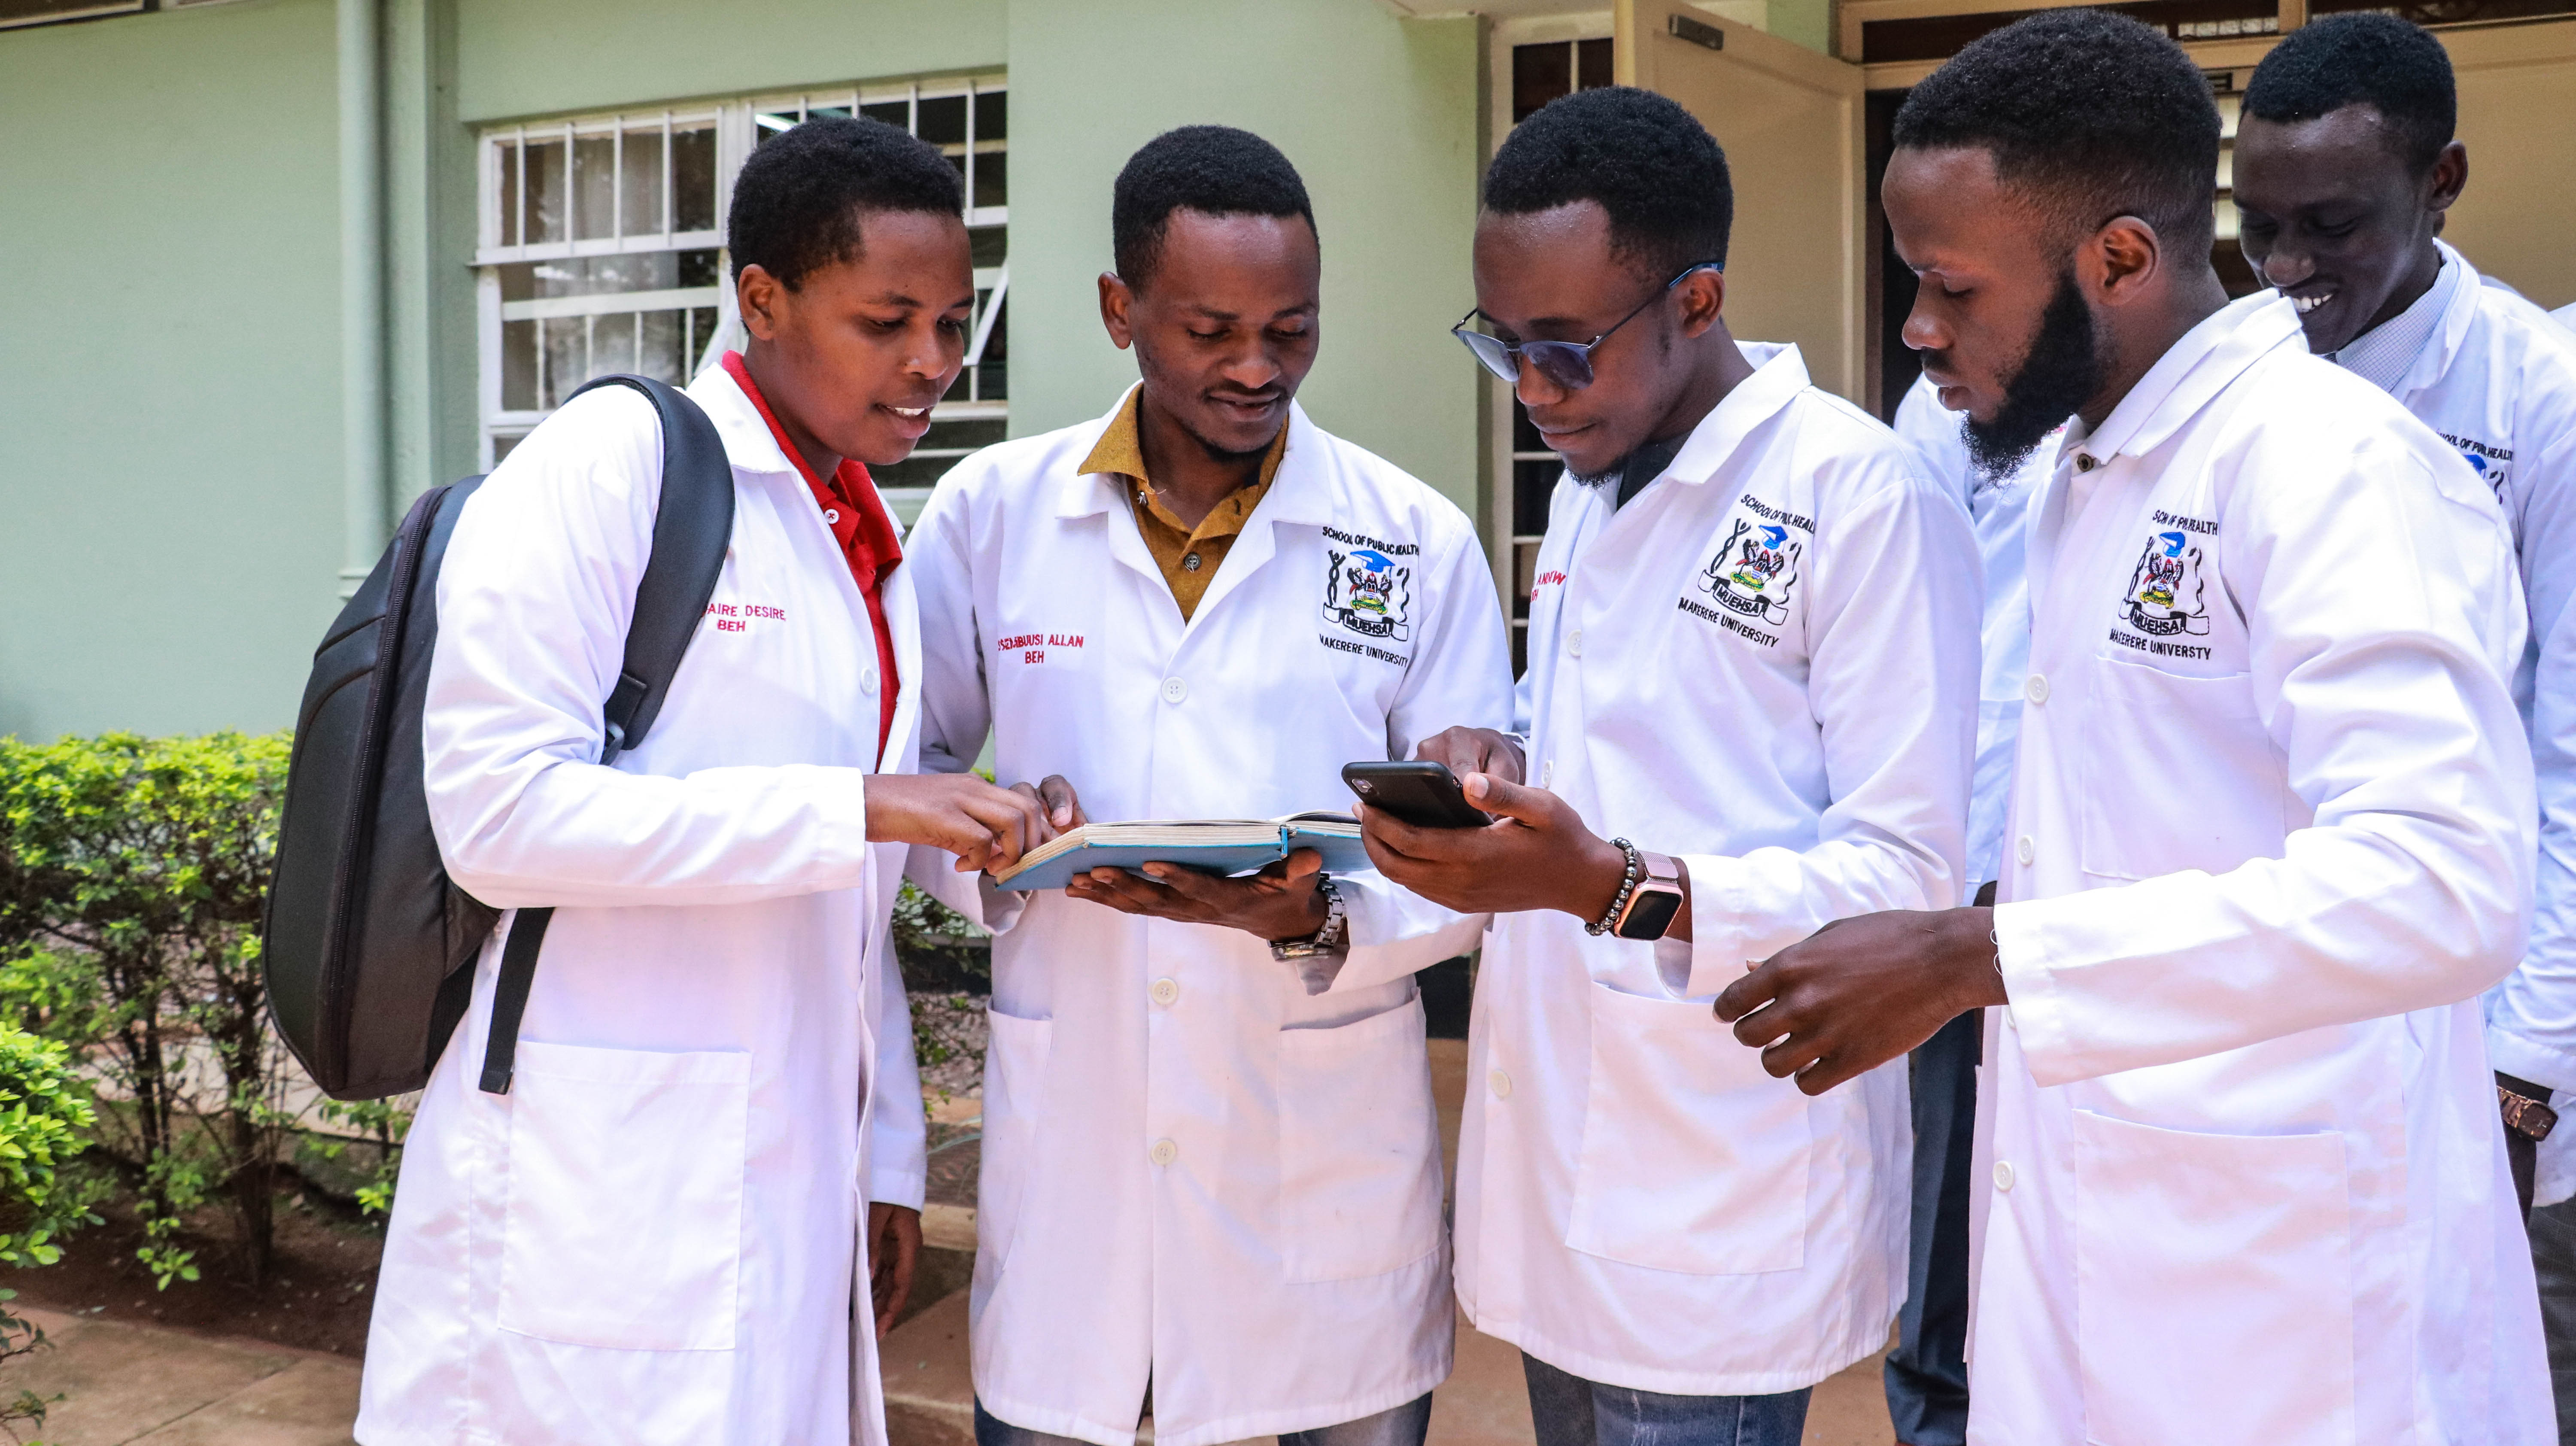 Allan Ssembuusi, (second left) discussing with classmates at Makerere School of Public Health last year.